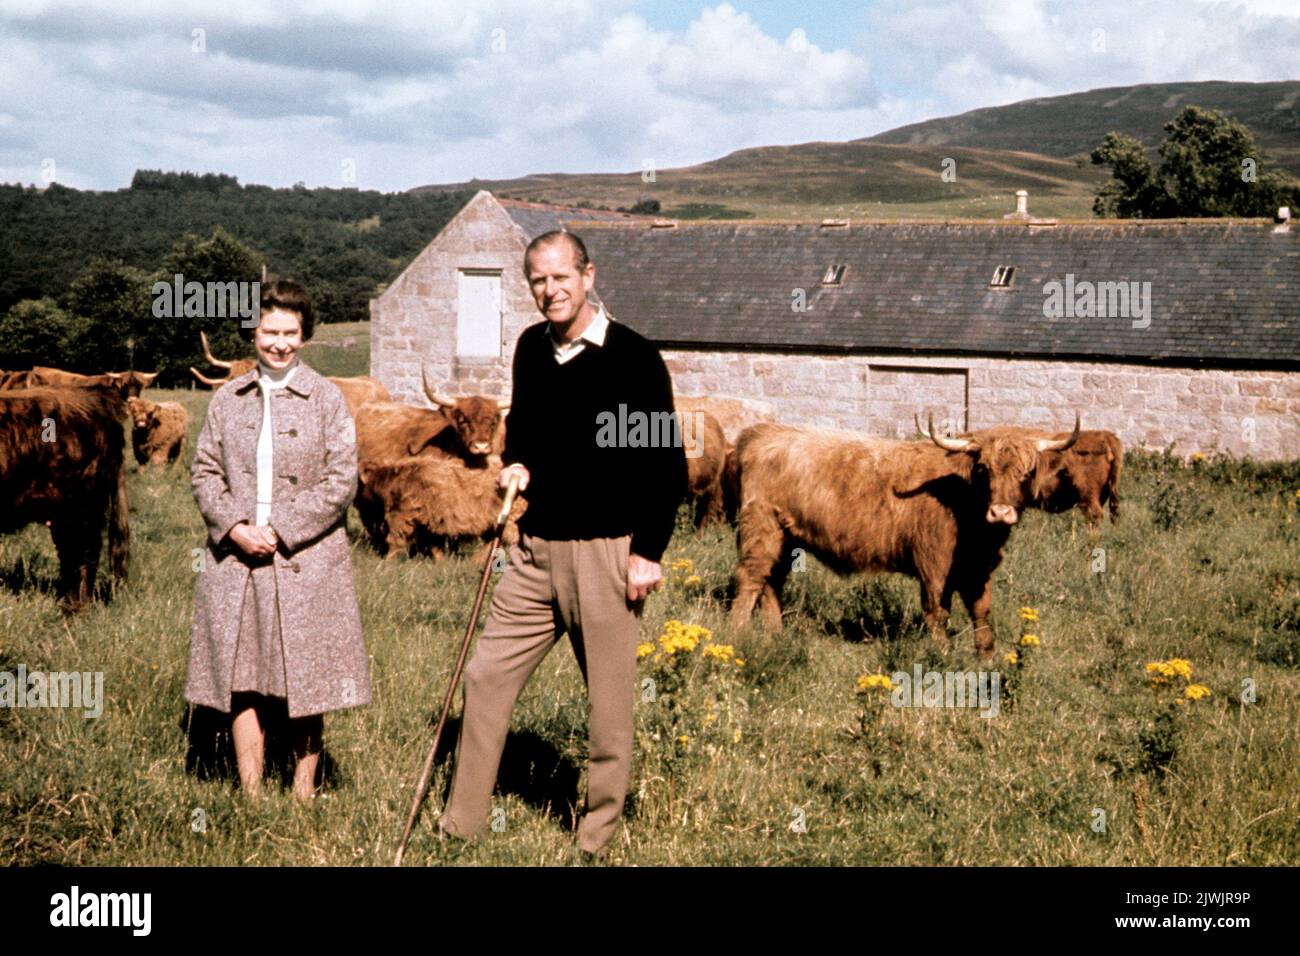 File photo dated 01/09/72 of Queen Elizabeth II and the Duke of Edinburgh during a visit to a farm on their Balmoral estate, to celebrate their Silver Wedding anniversary. The Queen is said to never be happier than when she is staying on her beloved Balmoral estate. Balmoral Castle -her private Scottish home in Aberdeenshire -was handed down to her through generations of royals after being bought for Queen Victoria by Prince Albert in 1852. Victoria described Balmoral as her 'Heaven on Earth', and it is where she sought solace after Albert's death. The turreted grey stone castle by the River D Stock Photo